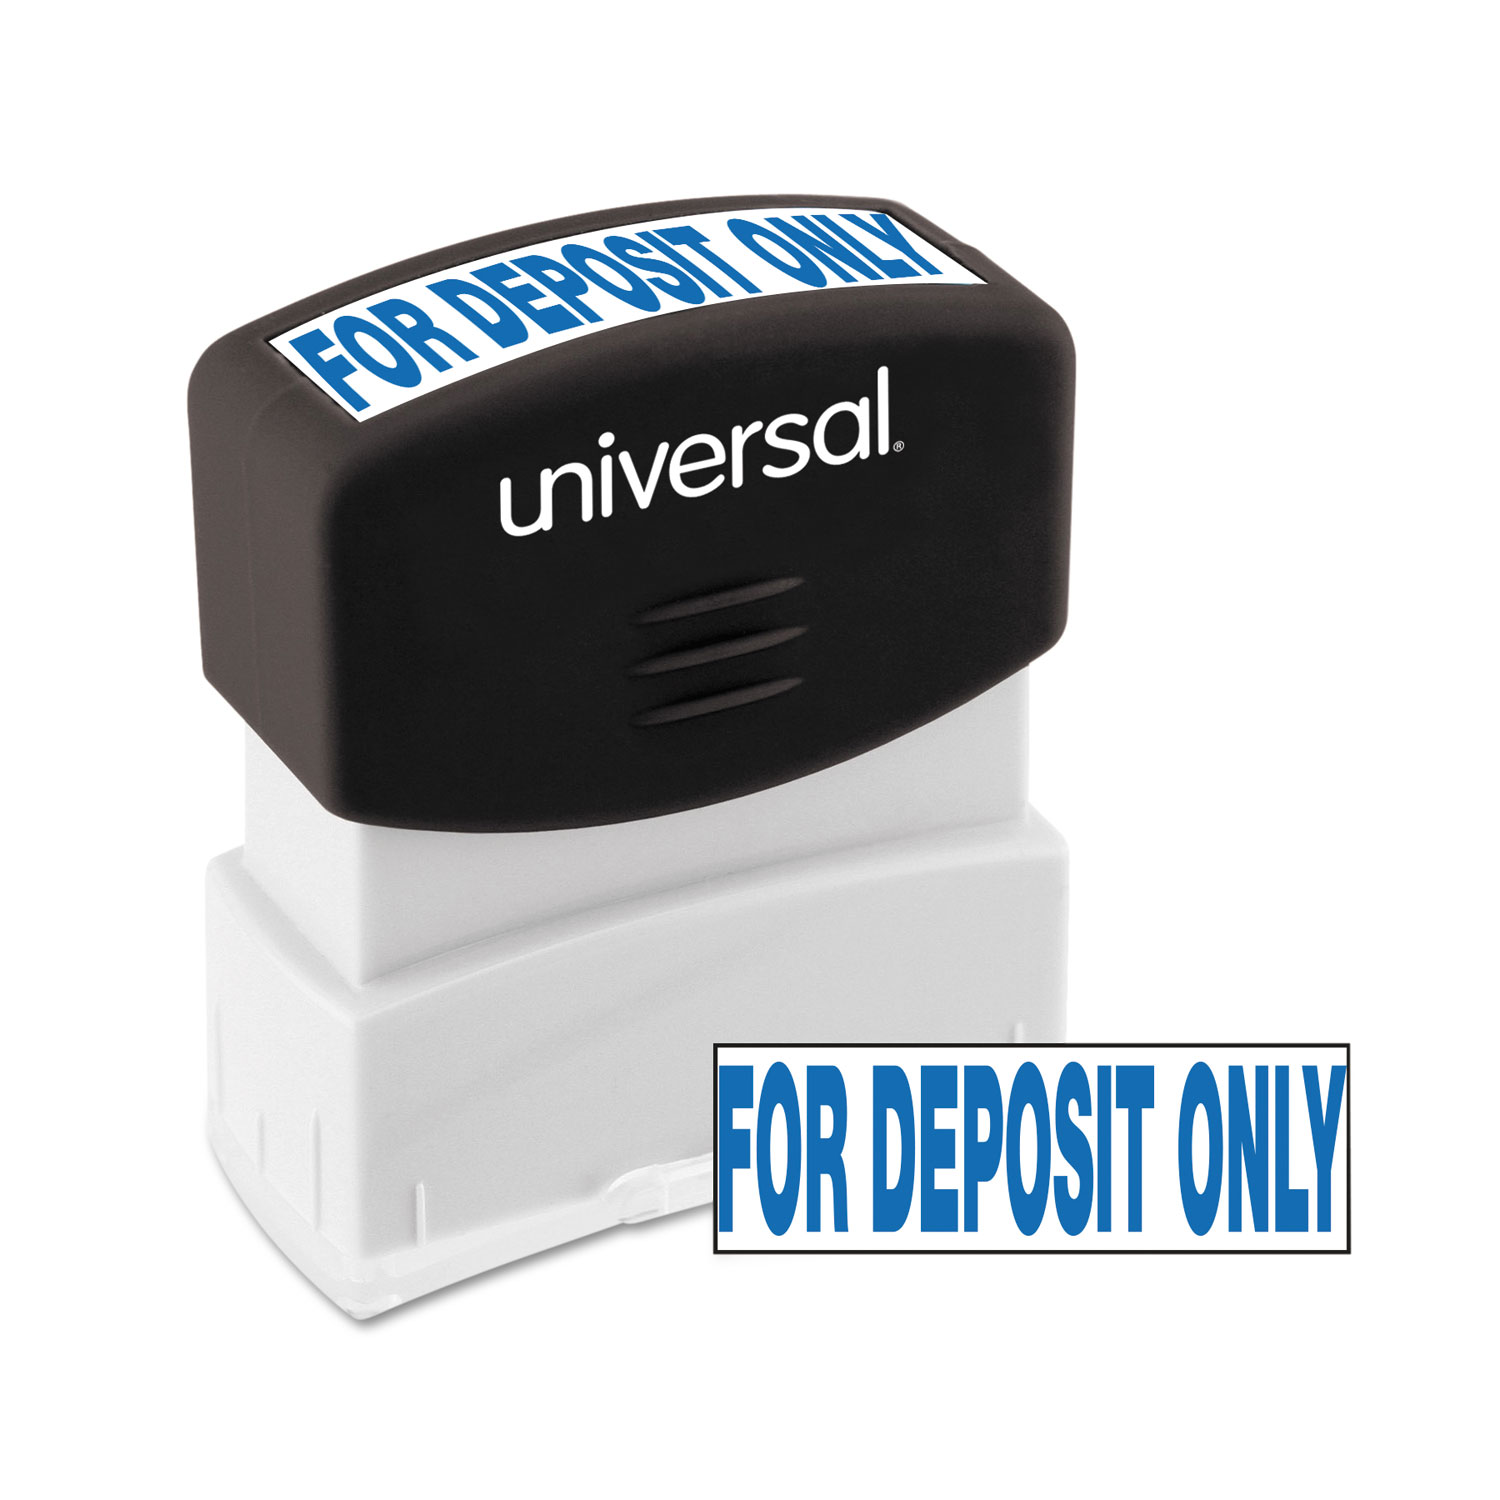  Universal UNV10056 Message Stamp, for DEPOSIT ONLY, Pre-Inked One-Color, Blue (UNV10056) 